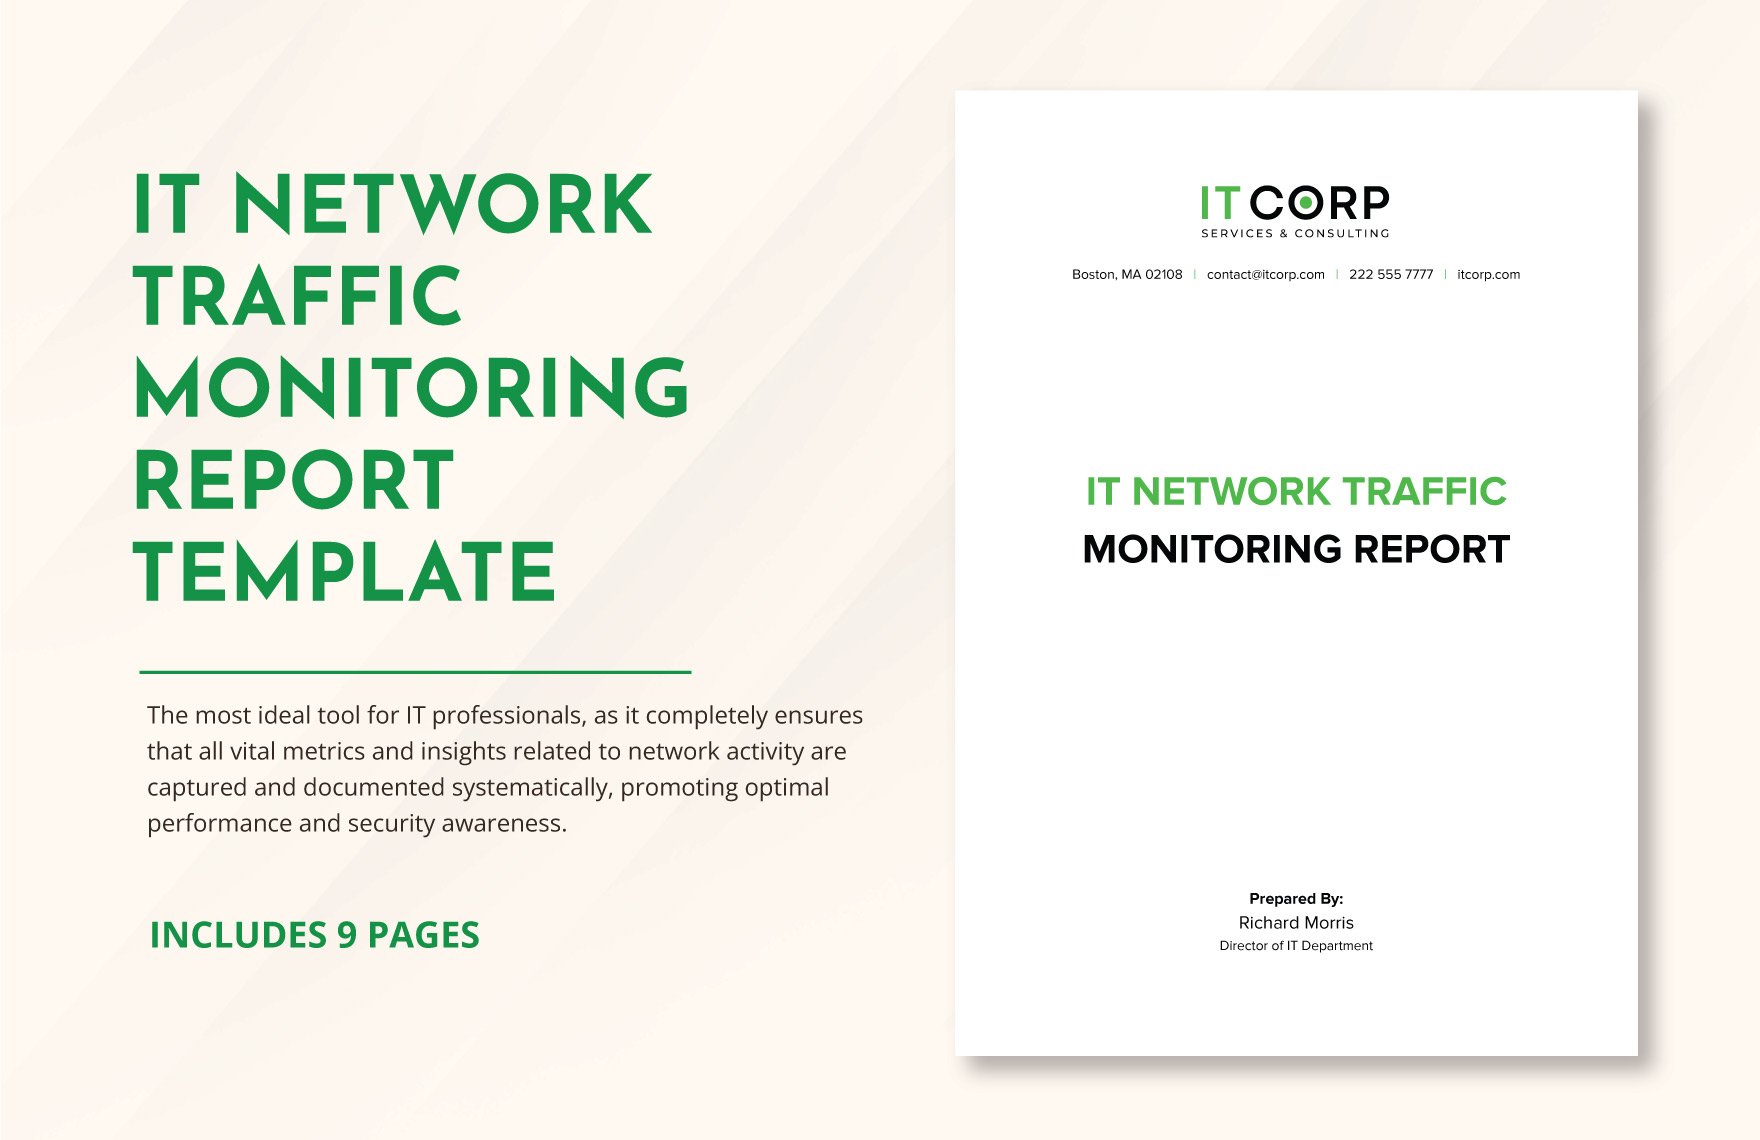 IT Network Traffic Monitoring Report Template in Word, Google Docs, PDF